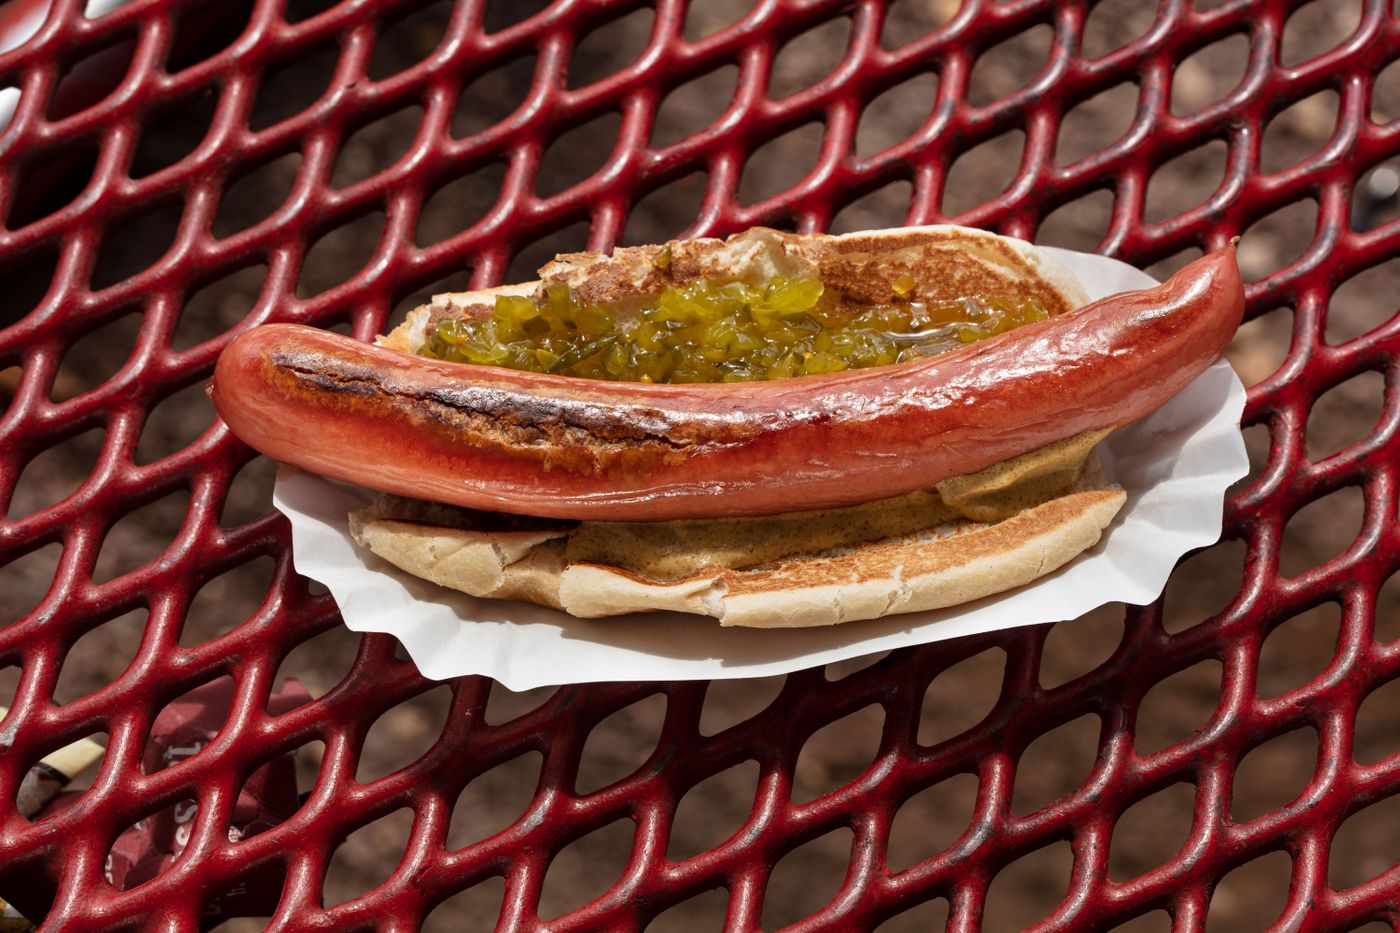 More New Jersey Hot Dogs Worth Eater.com's Time